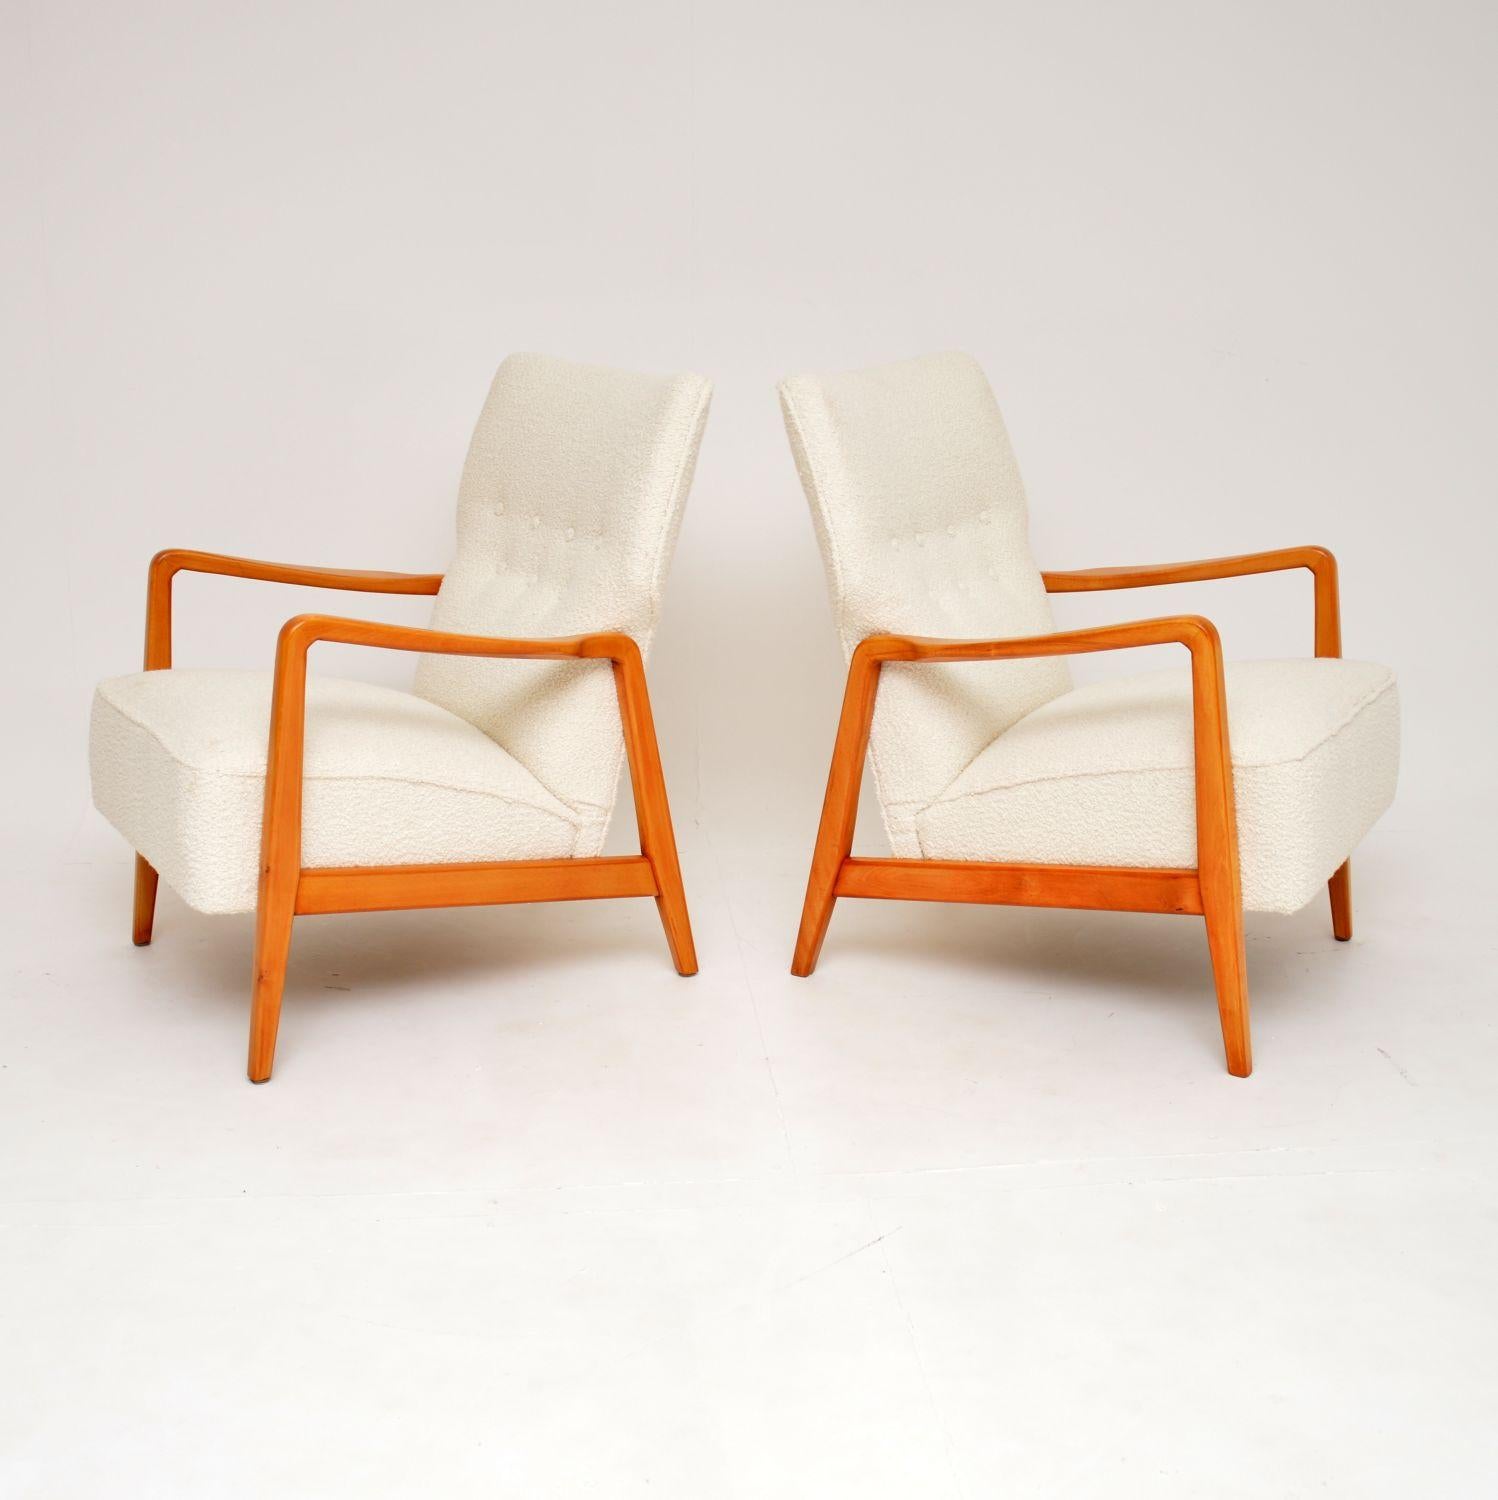 A superb pair of vintage Swedish armchairs. This model is called “Duxello’, they were designed by Folke Ohlsson and made by Dux in Sweden in the 1950-60’s.

The quality is outstanding, they are very well built and extremely comfortable, with well